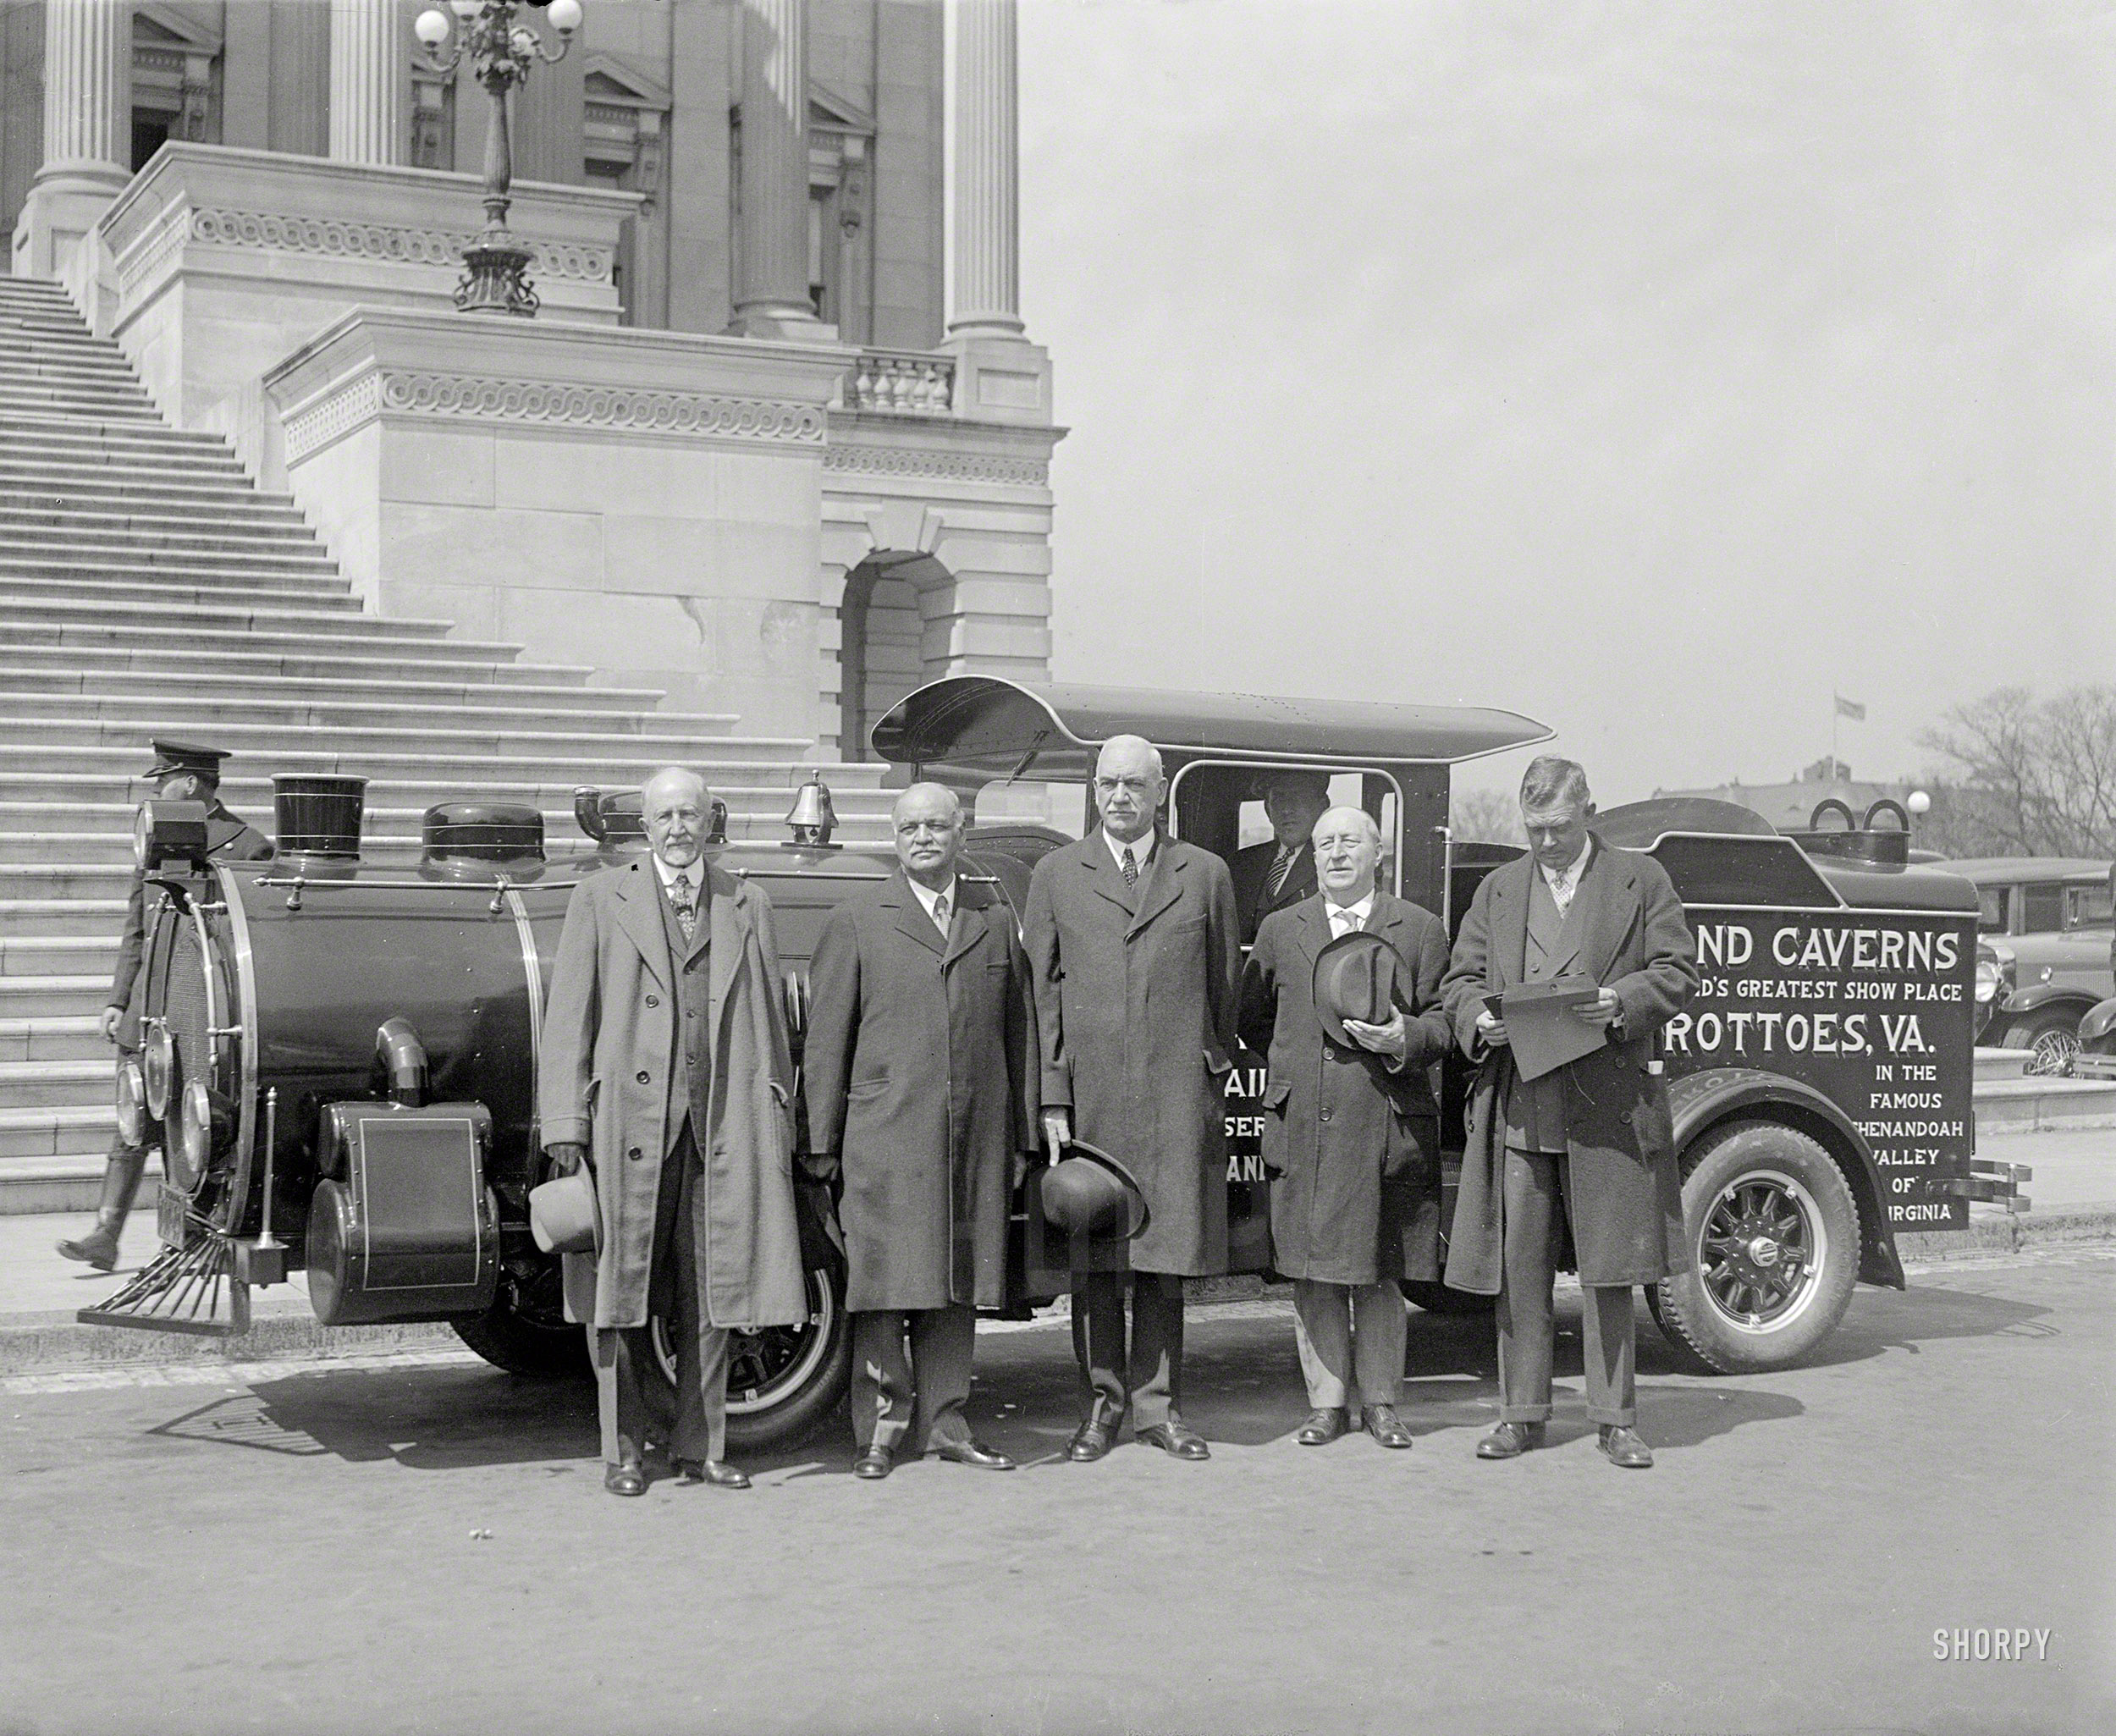 Circa 1930. "Vice President Curtis at Capitol with steam car." Which, as evidenced by the news item below, encountered a bit of trouble during its stop in Washington. National Photo Co. Collection glass negative. View full size.Auto Locomotive Leads to Arrest
Man to Be Tried for Using Car
For Advertising Railroad.
The Washington Post -- May 17, 1930

&nbsp; &nbsp; &nbsp; &nbsp; Albert E. Lentz, of 501 Twelfth street northwest, will be tried in Police Court next Thursday on charges of using a motor vehicle for advertising purposes and of driving an automobile with view obstructed.
&nbsp; &nbsp; &nbsp; &nbsp; The latter charge was placed against the man after traffic officials had inspected the vehicle, a locomotive on an automobile chassis, at the Traffic Bureau. The vehicle, which is used to advertise the Norfolk & Western Railway and the Grand Caverns of the Shenandoah Valley, was driven to the Police Court Building and was inspected by Judge Isaac R. Hitt before the case was continued.
&nbsp; &nbsp; &nbsp; &nbsp; Lentz was arrested yesterday morning on Madison Place Northwest by Sergt. Milton D. Smith and Policeman J.R. LeFoe, both of the Traffic Bureau.